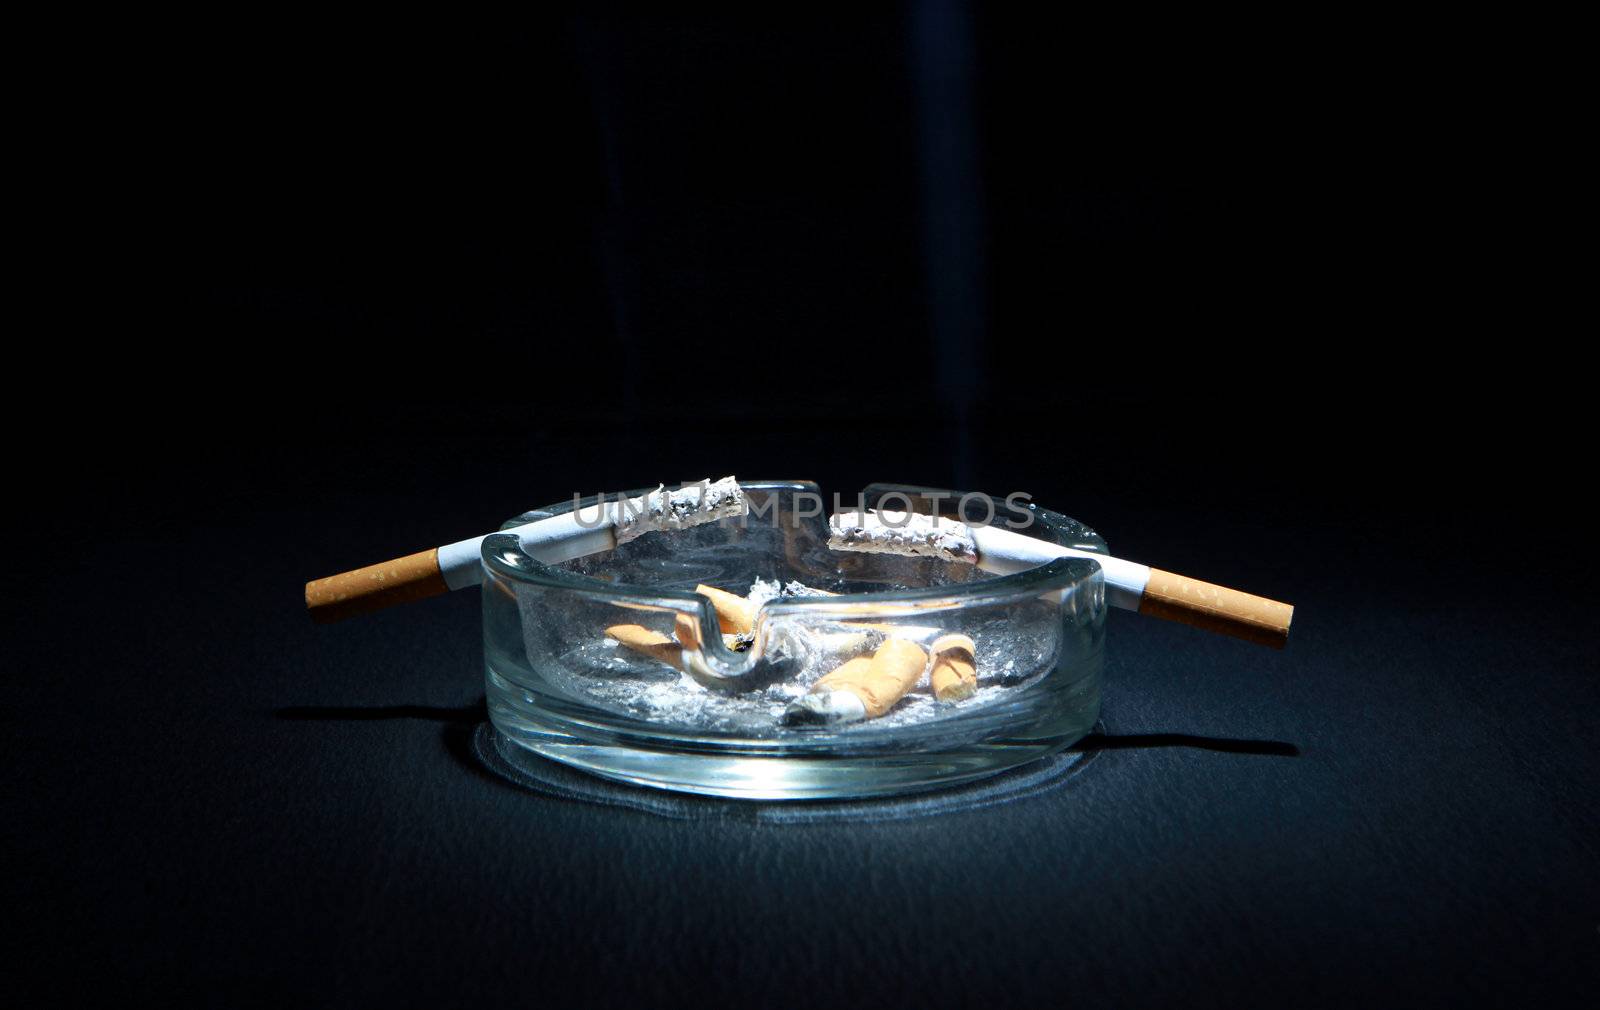 Dirty Ashtray And Two Cigarette On the Dark Background